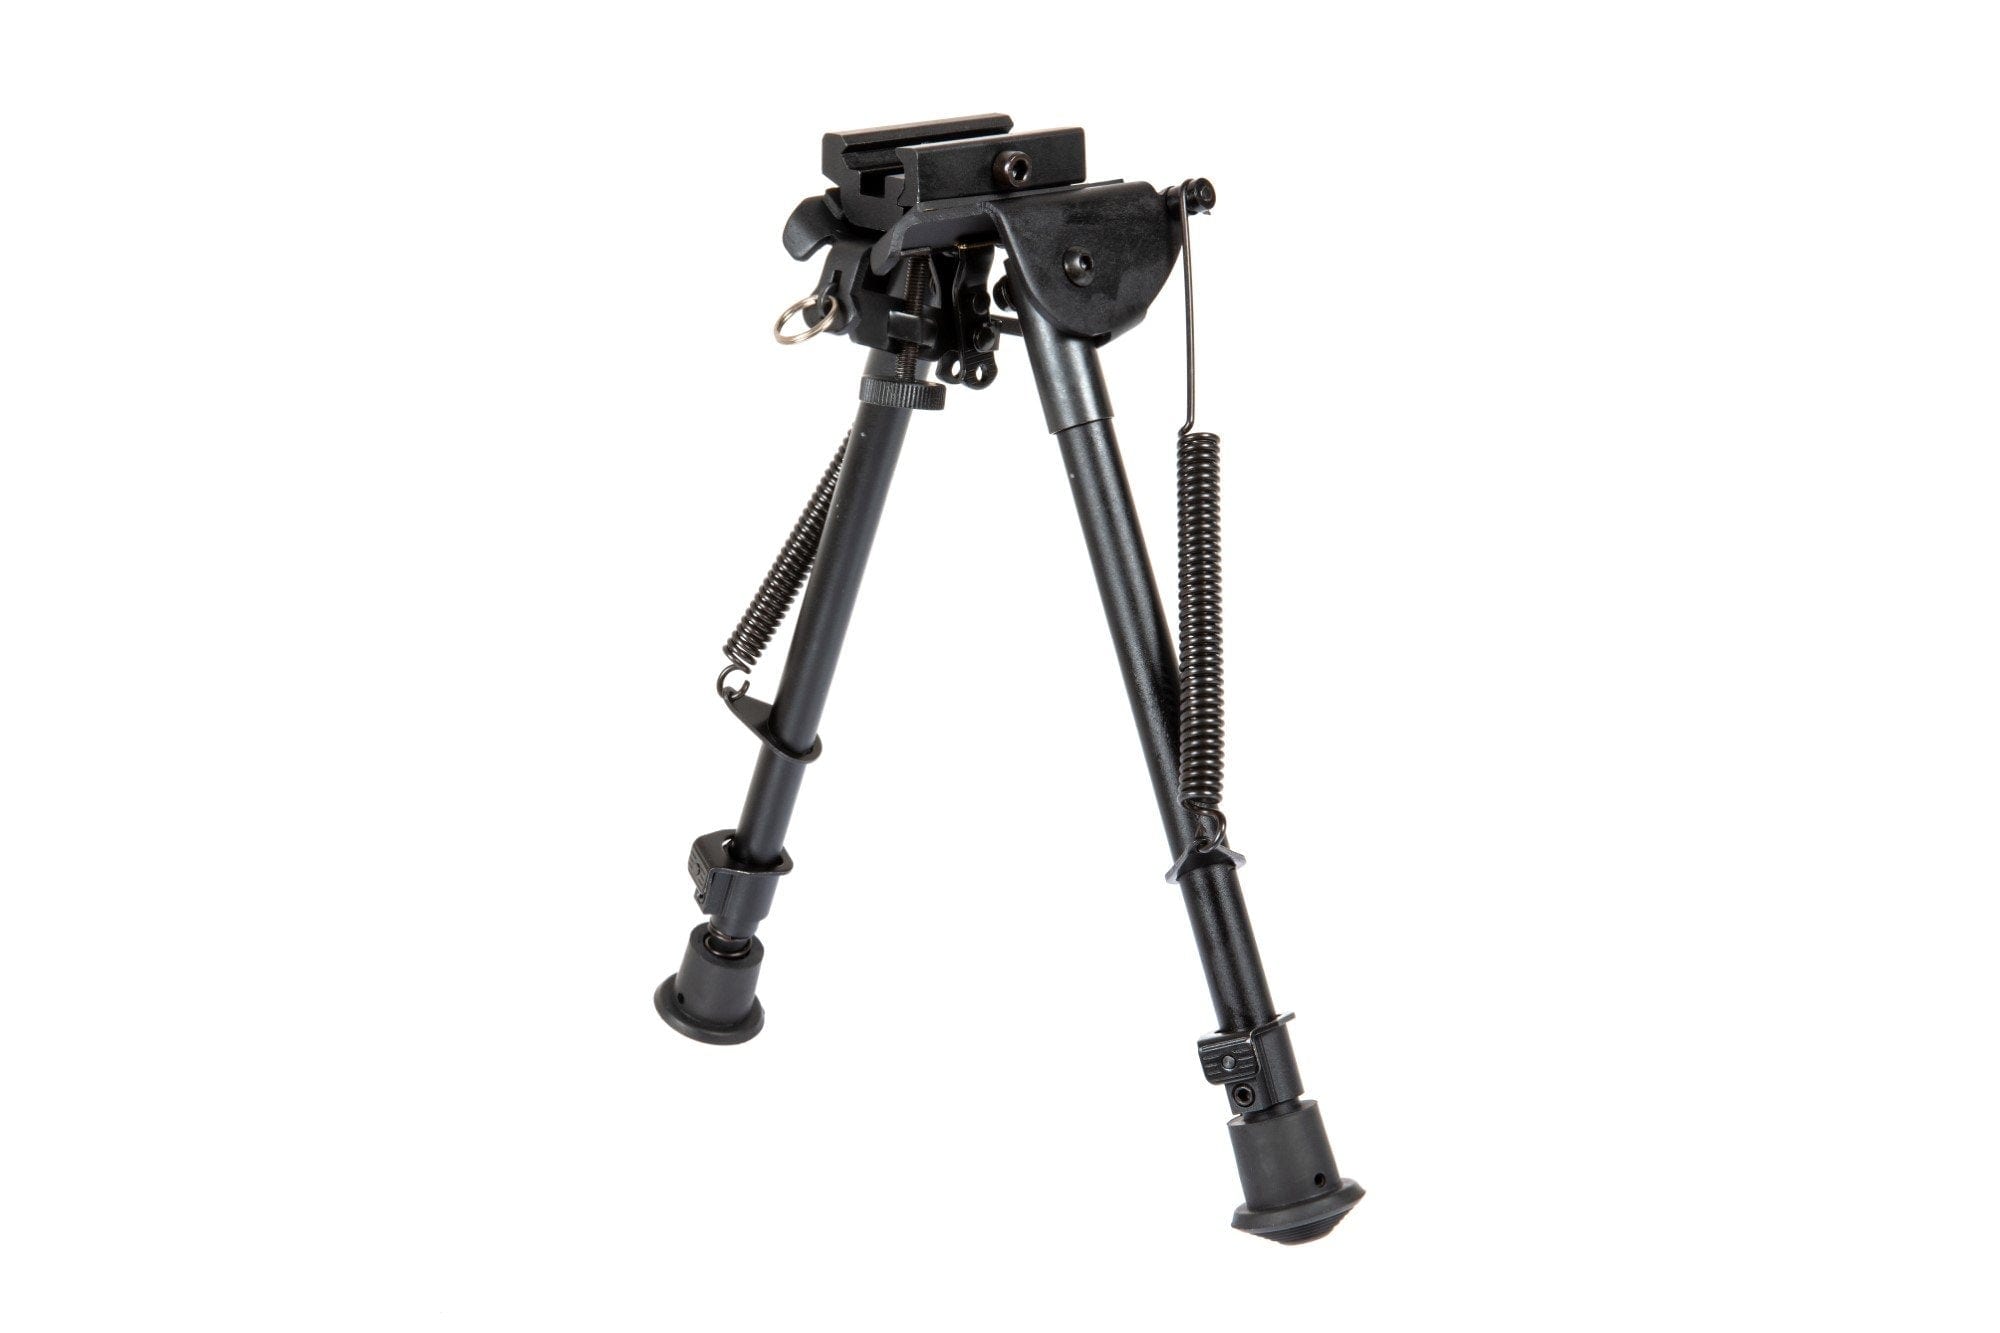 RIS 9 "spring bipod by Specna Arms on Airsoft Mania Europe